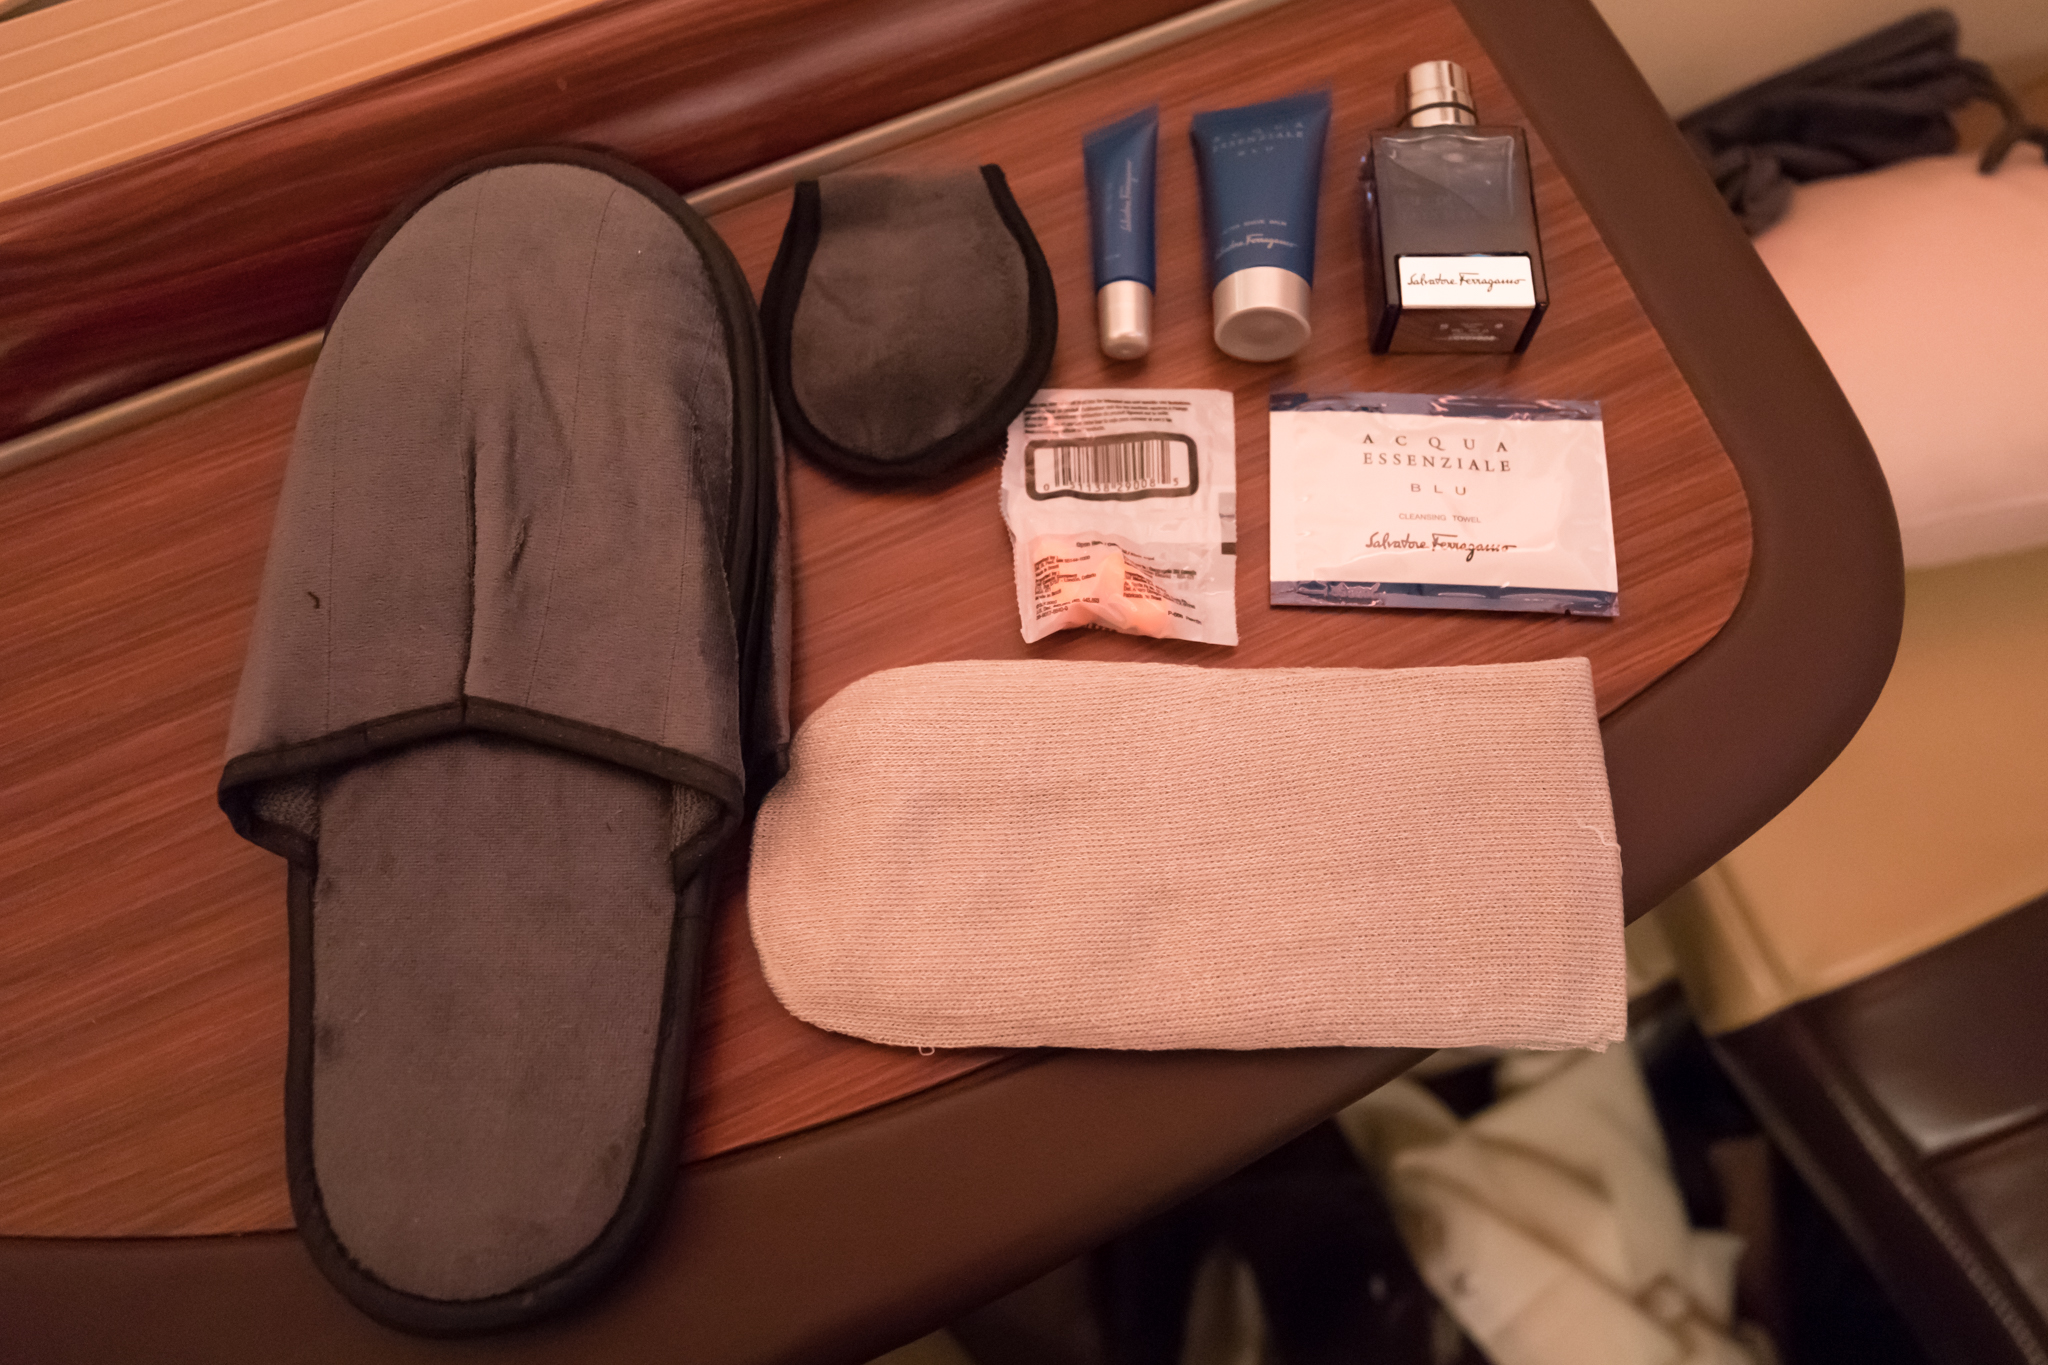 a slipper and toiletries on a table